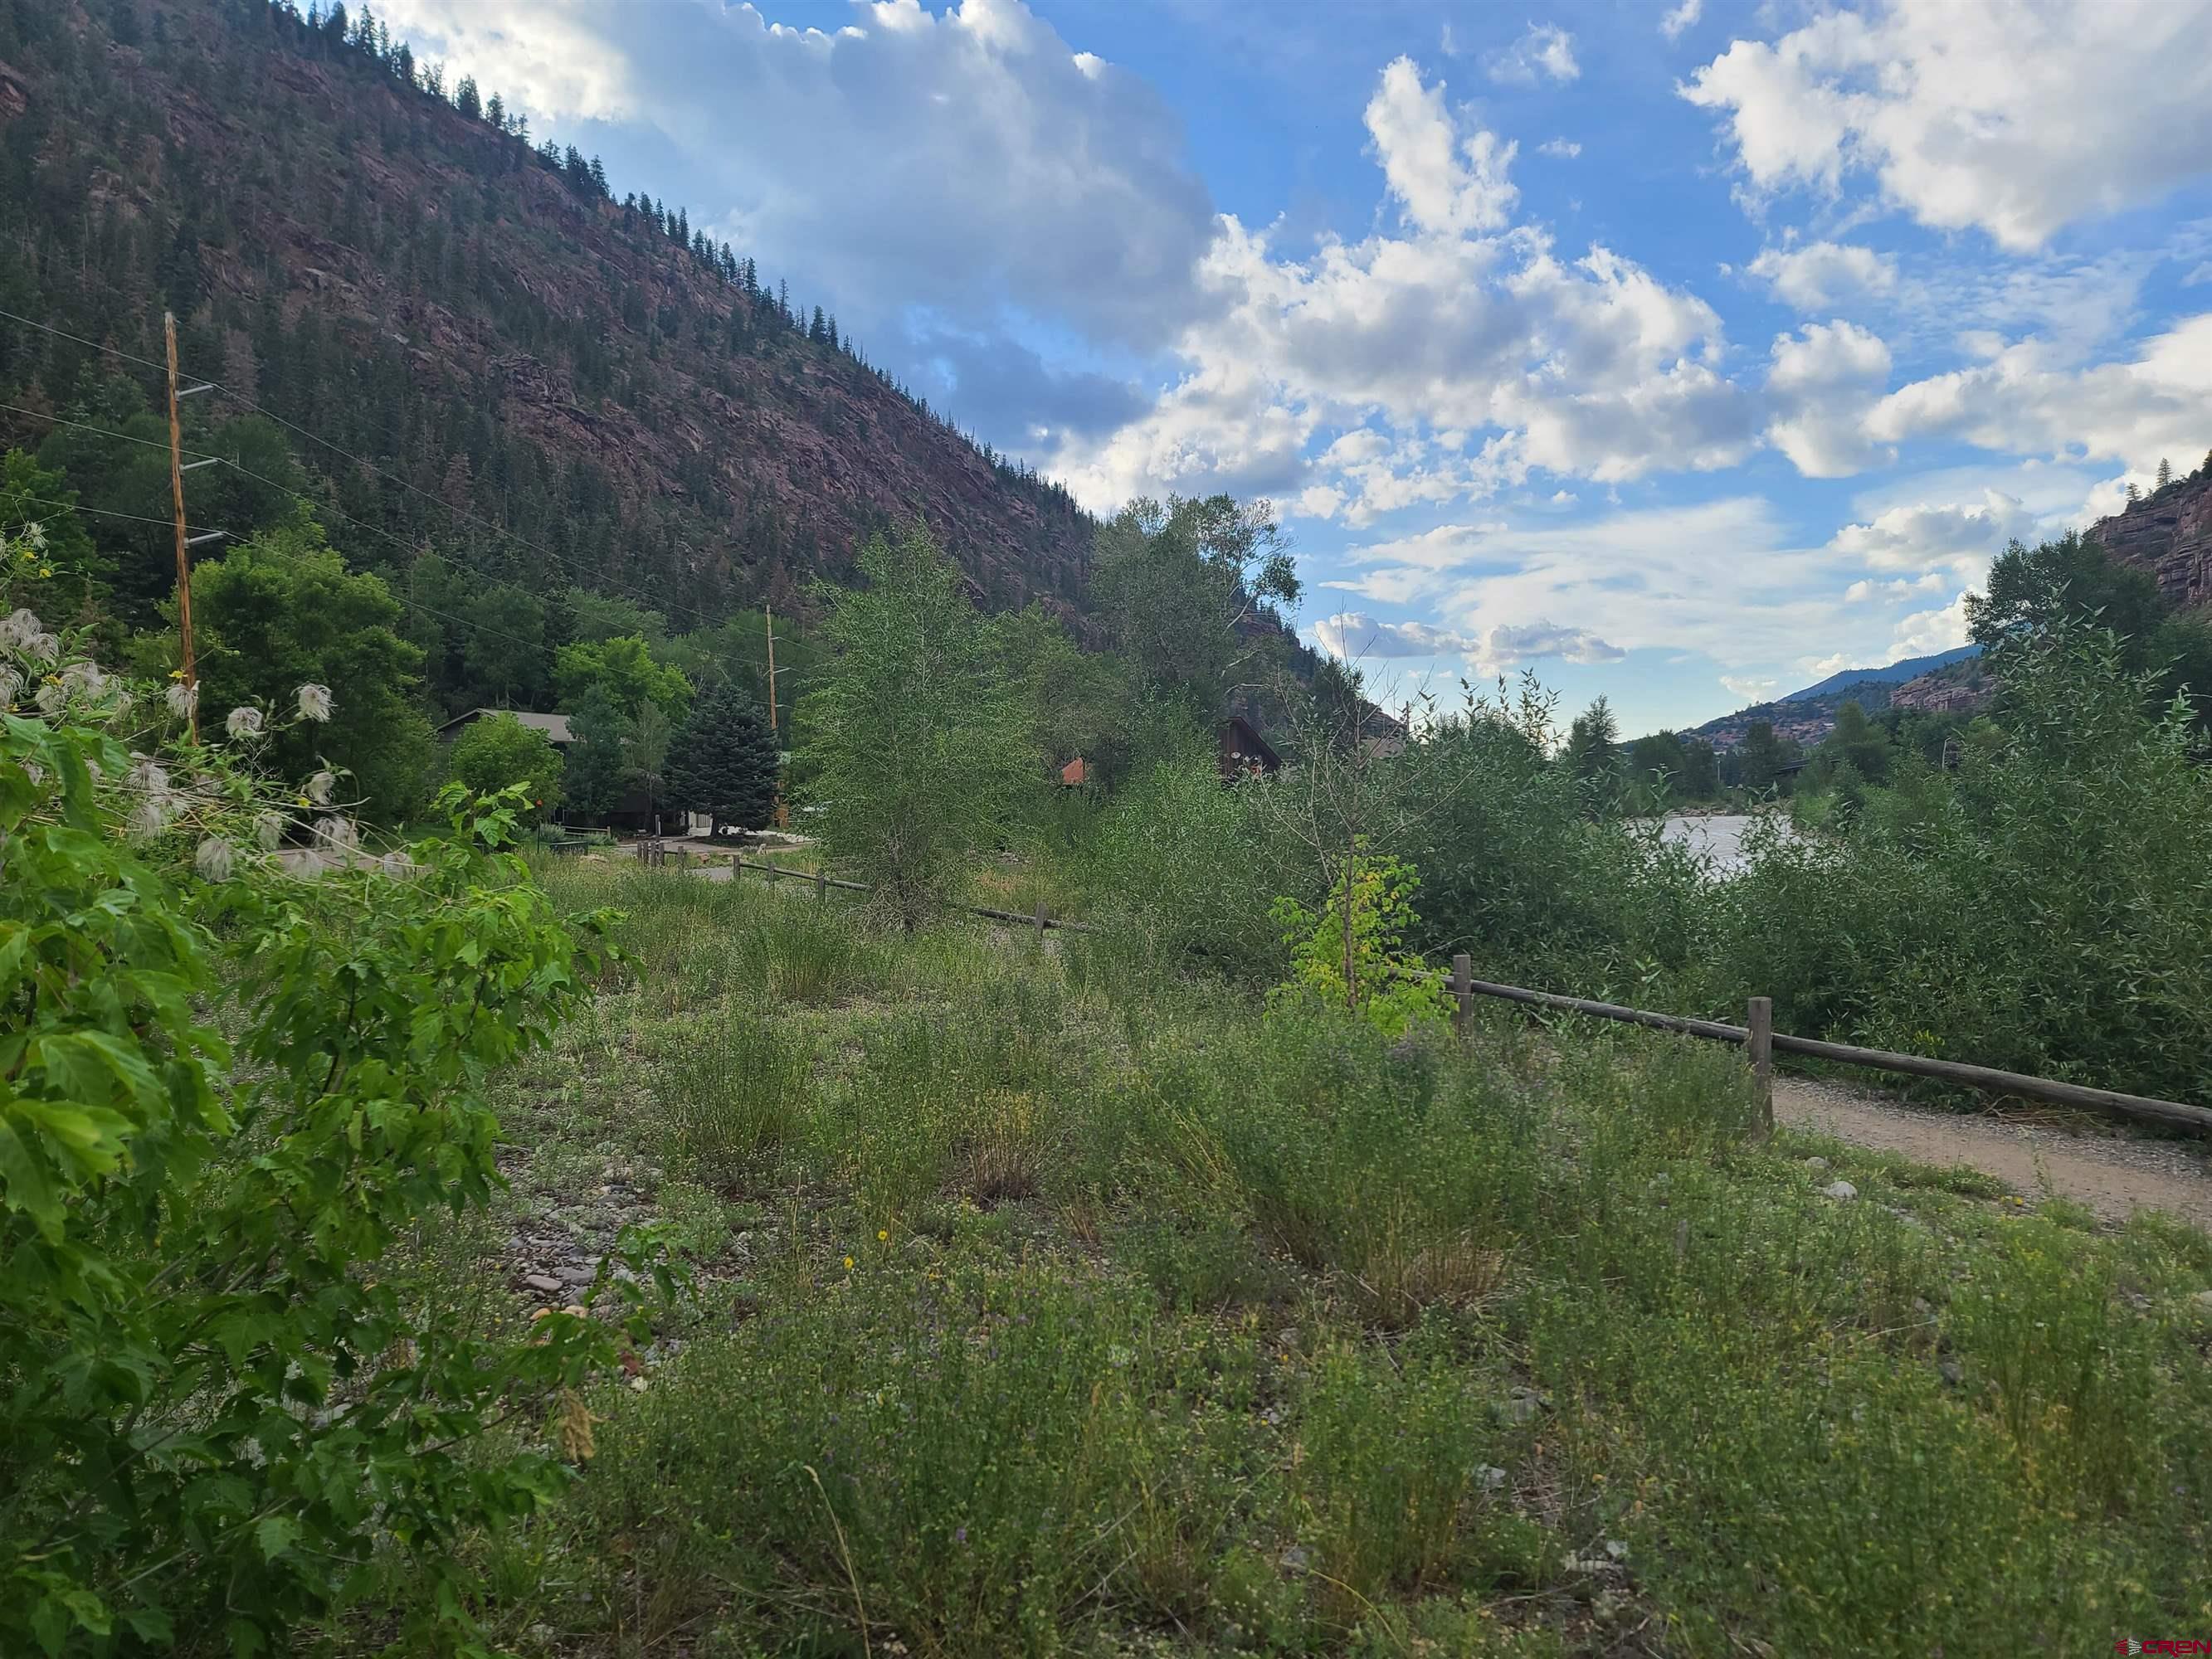 Wonderful lot along the Uncompahgre River and North Ouray Corridor trail. All utilities at the property line. Flat and totally usable. Great views of the river and surrounding mountains and mining structures. Zoned R2 which allows for single family or multi family structures. Additional lots are available. These are the only riverfront lots in Ouray. Property is part way through the subdivision process.